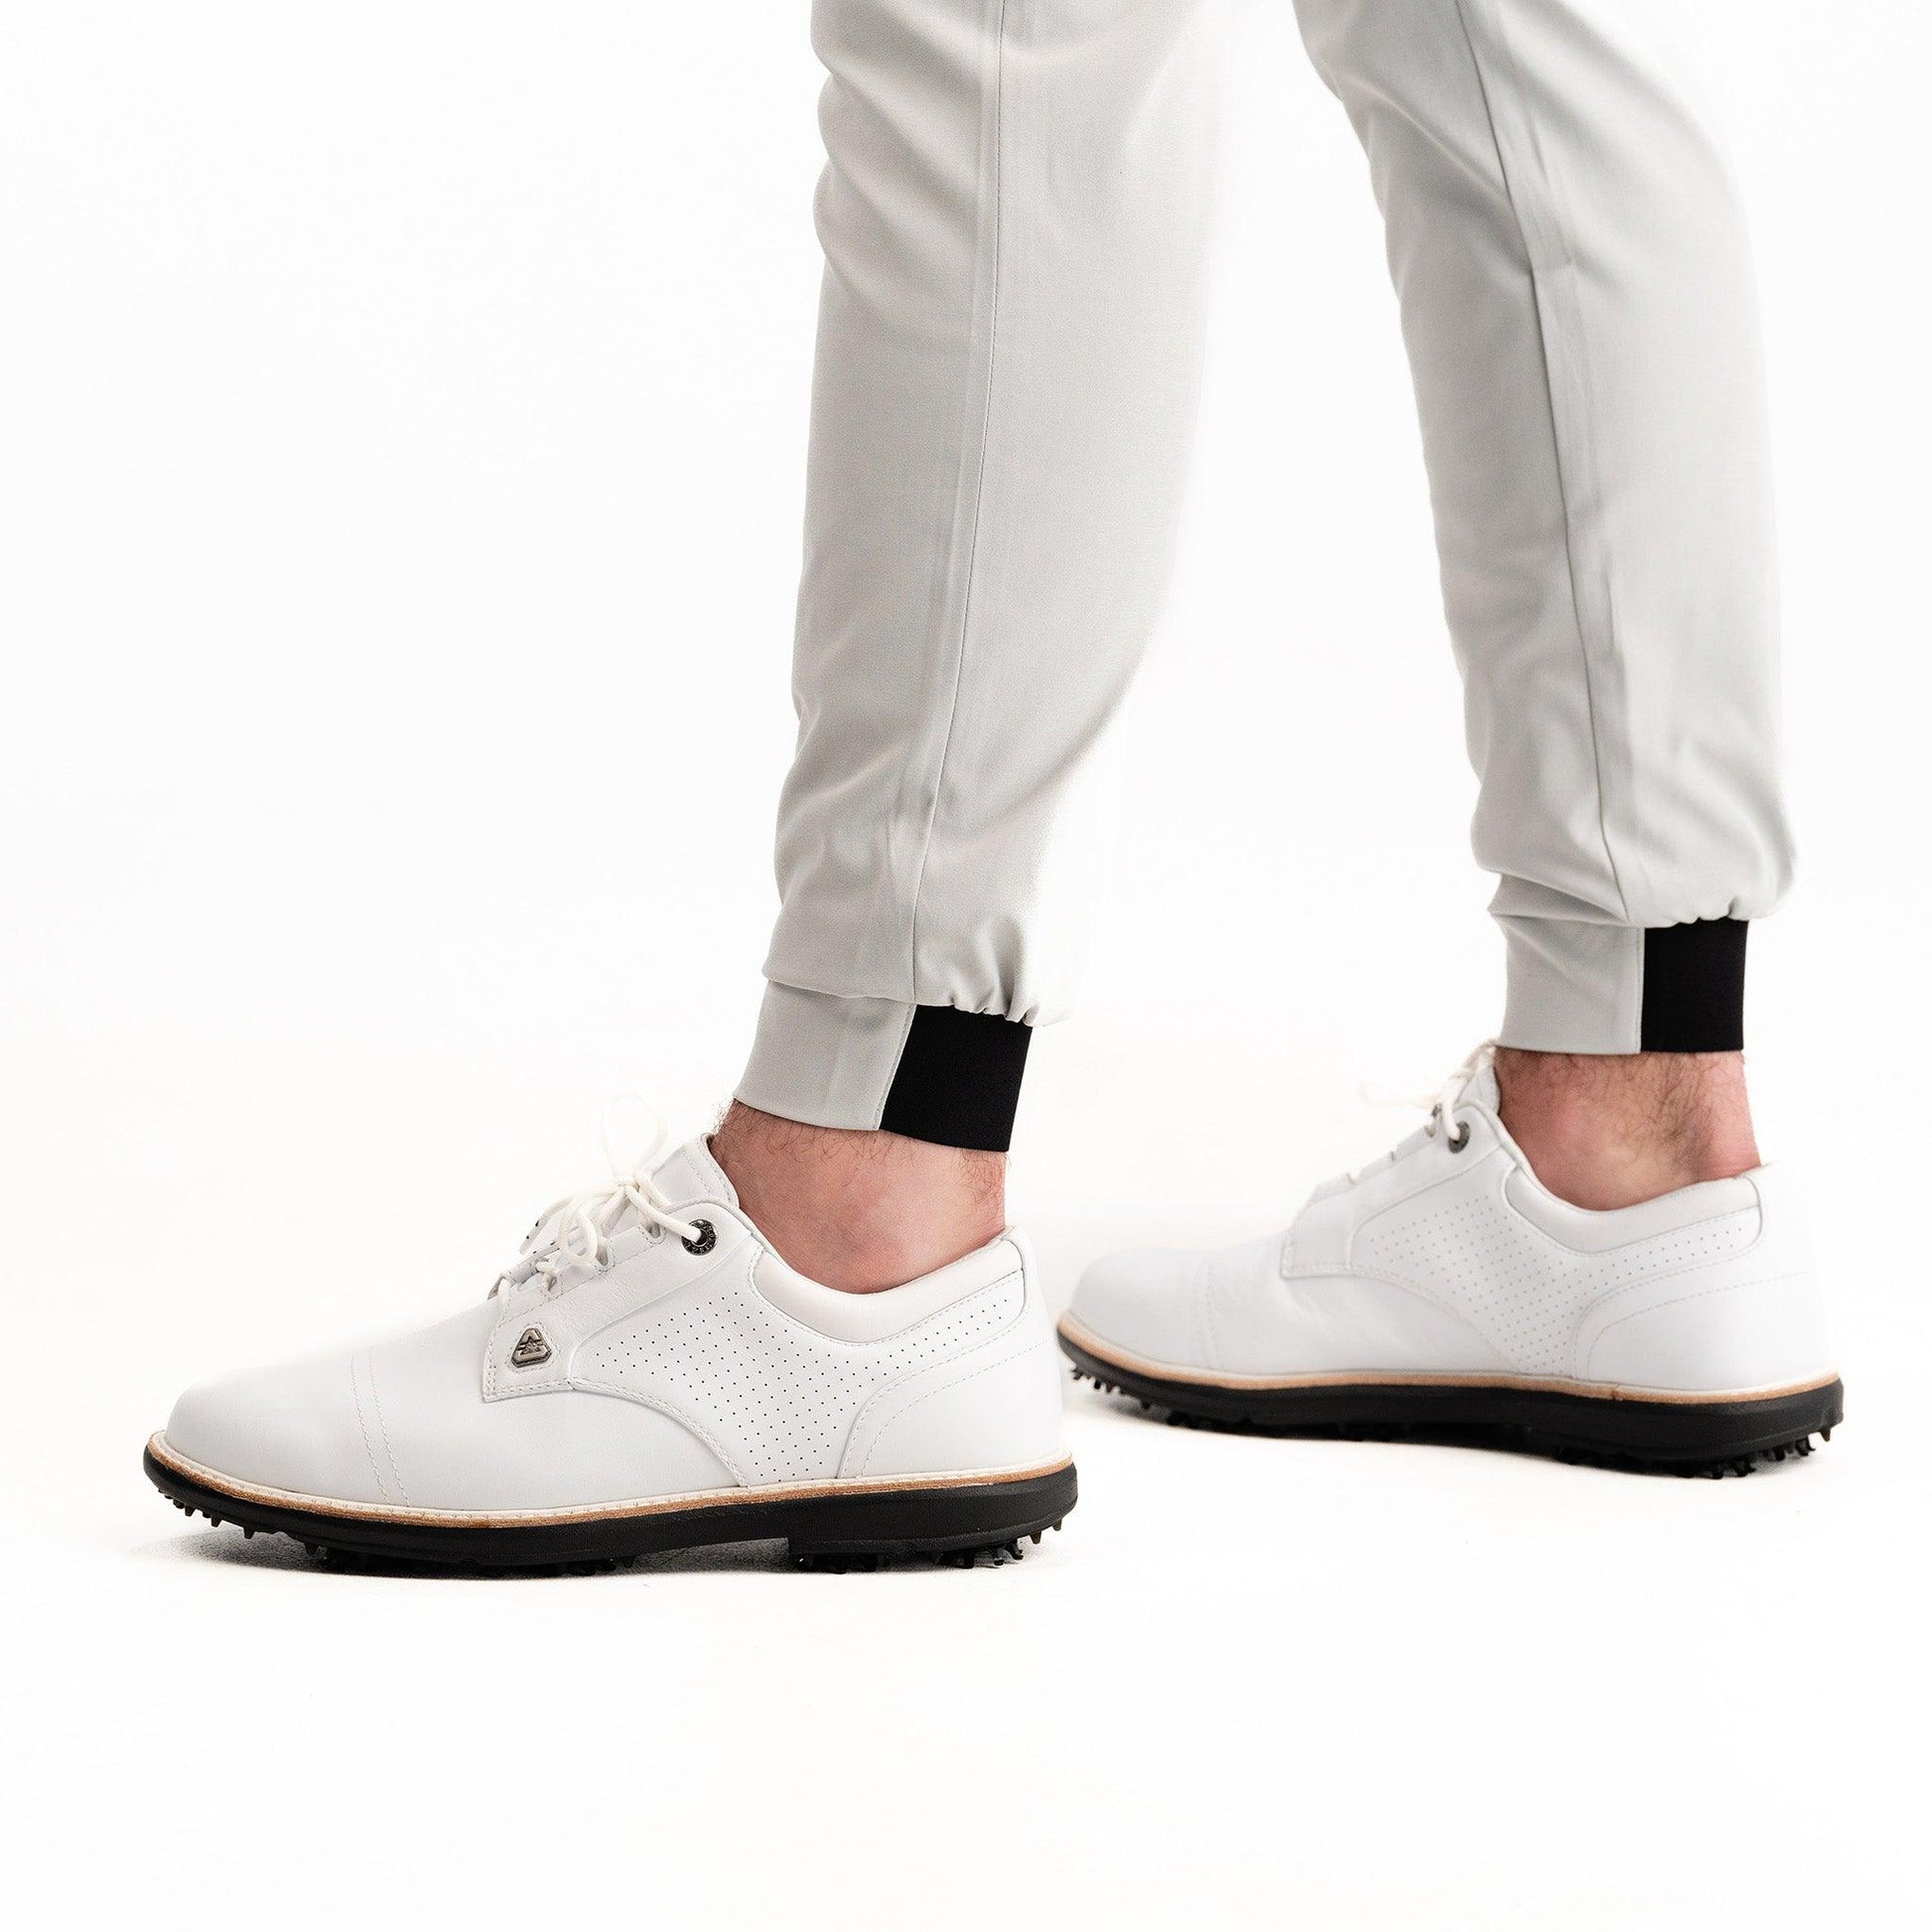 Joggers Collection From Good Good Golf